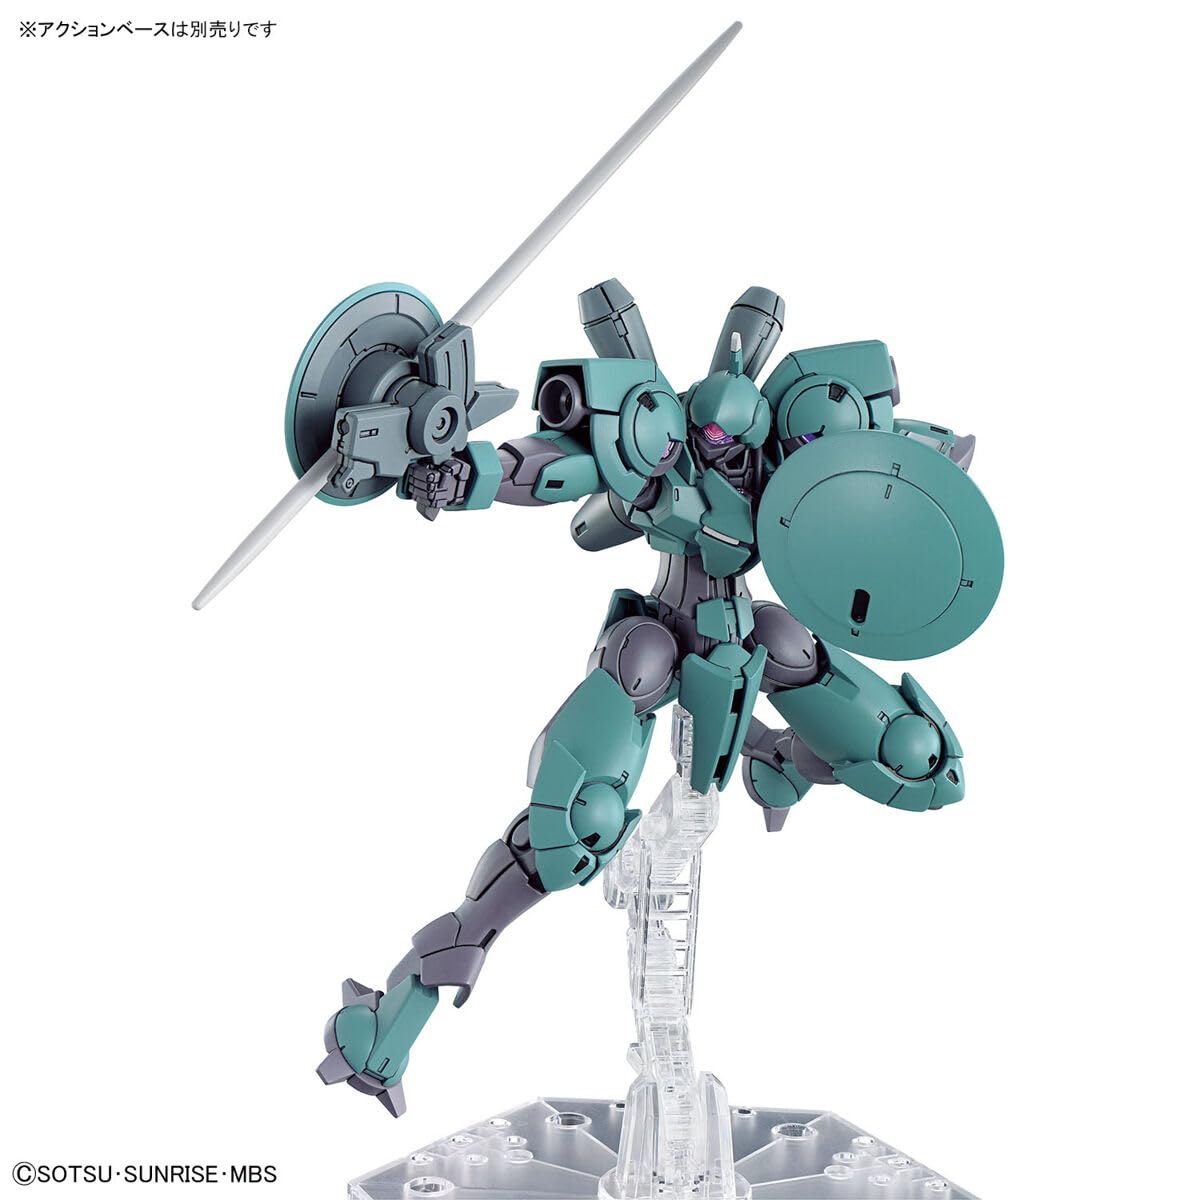 HG Mobile Suit Gundam Witch of Mercury Hindley 1/144 scale color-coded plastic model - BanzaiHobby